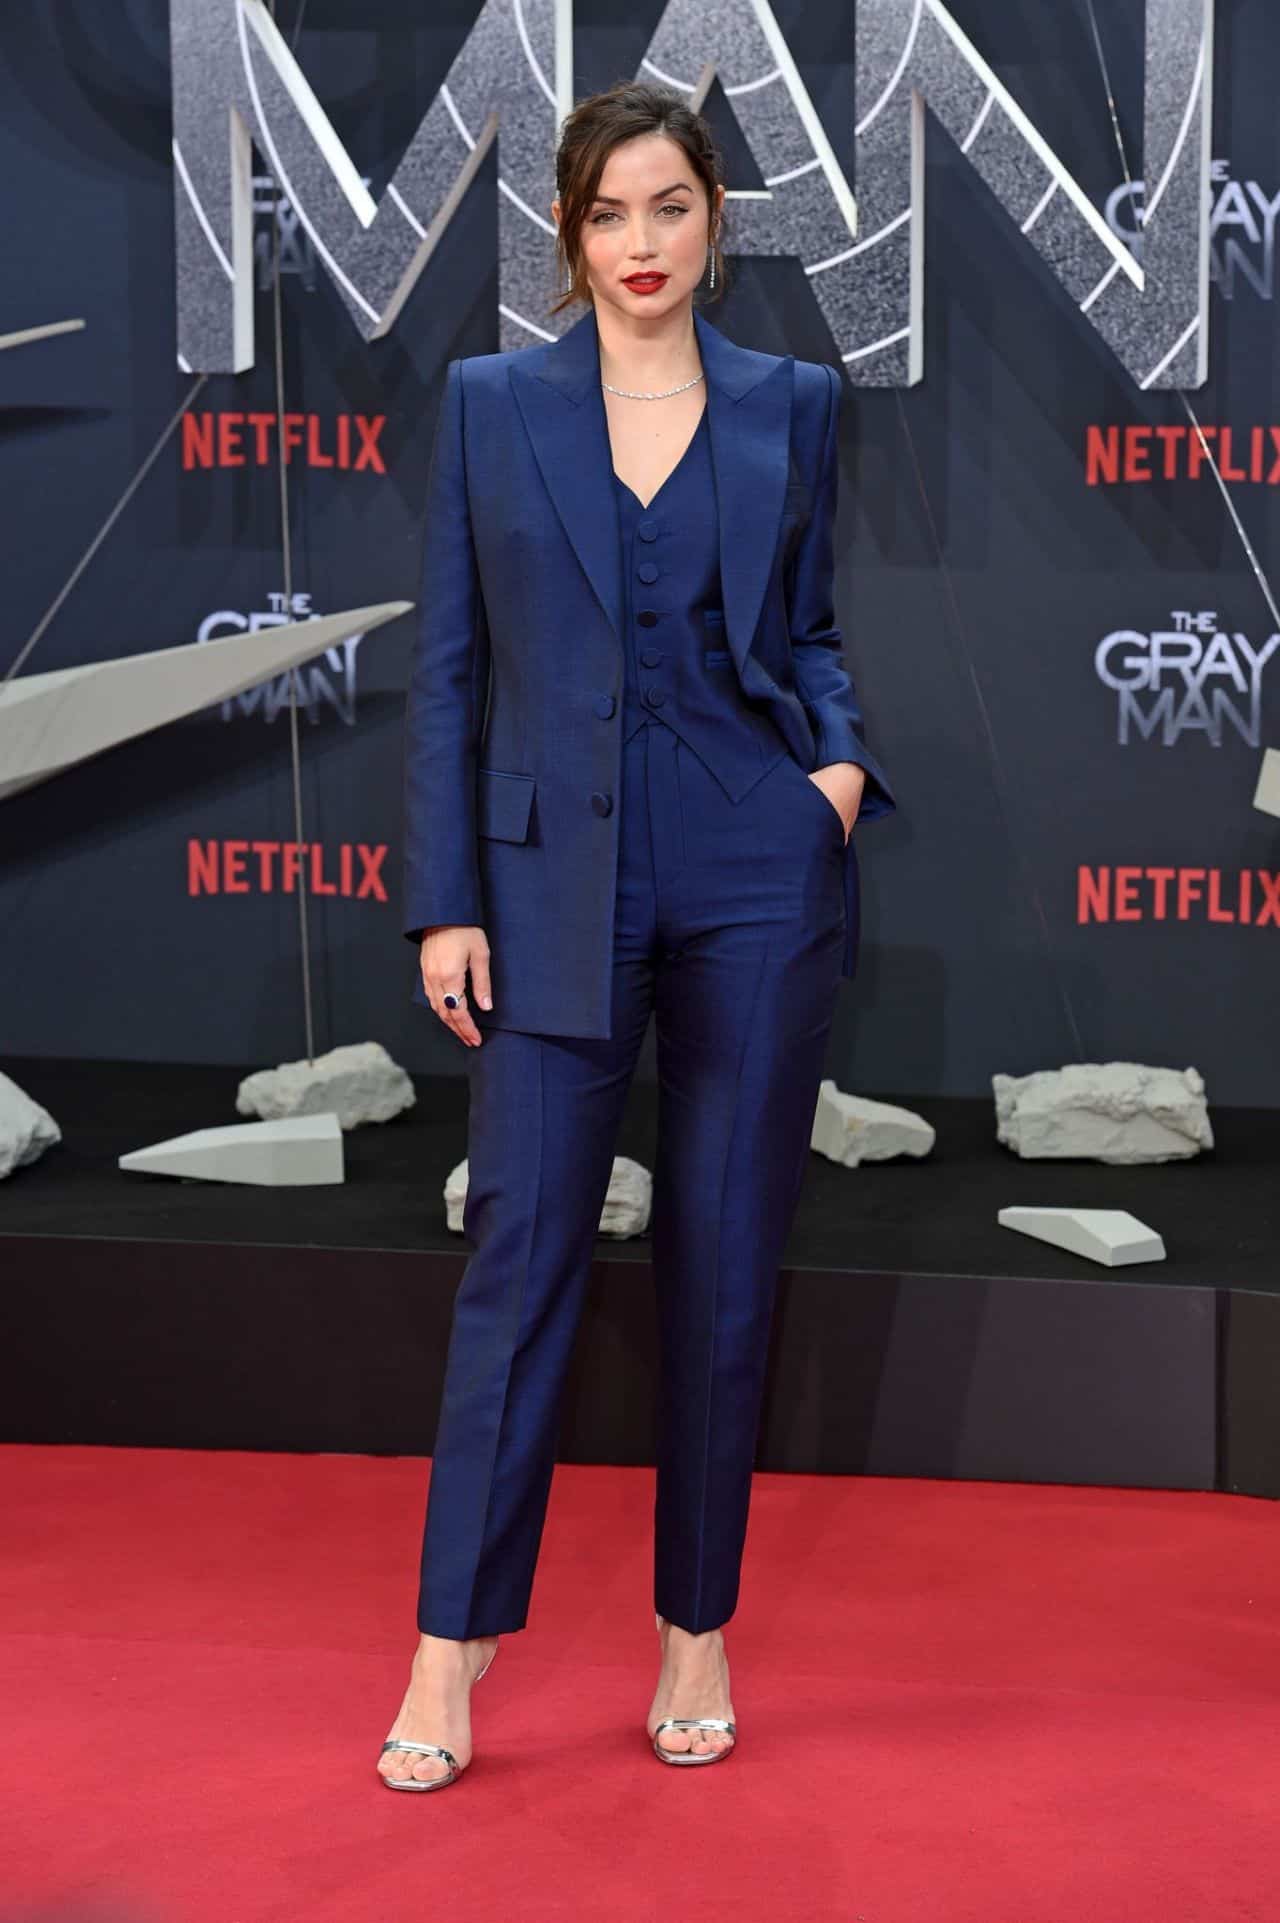 Ana de Armas Shows her CIA Look at “The Gray Man” Premiere in Berlin